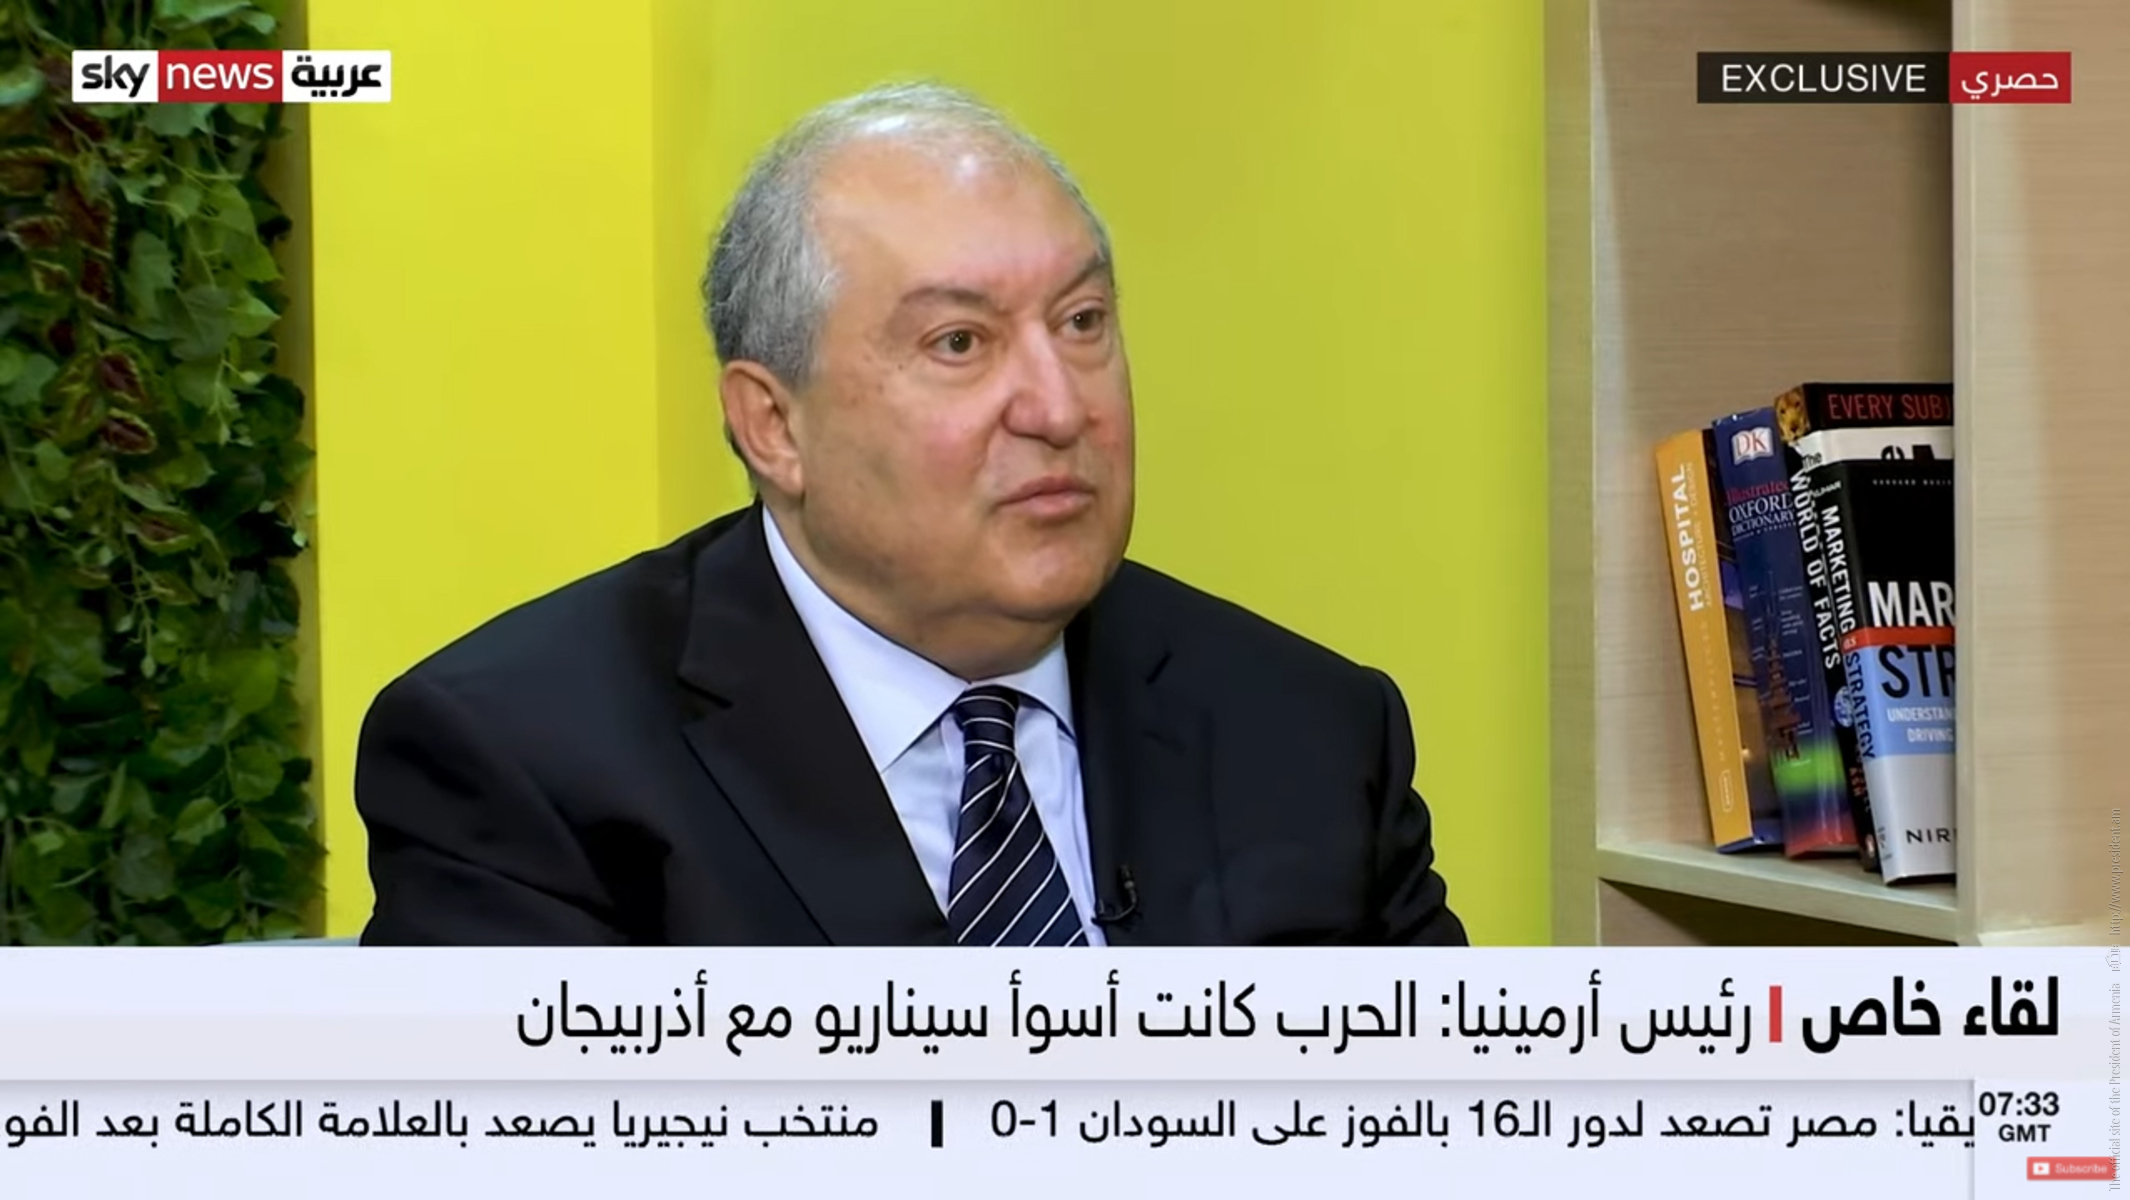 Armen Sarkissian: ‘I hope that this time, Azerbaijan and Armenia will be able to establish a lasting peace through compromises’